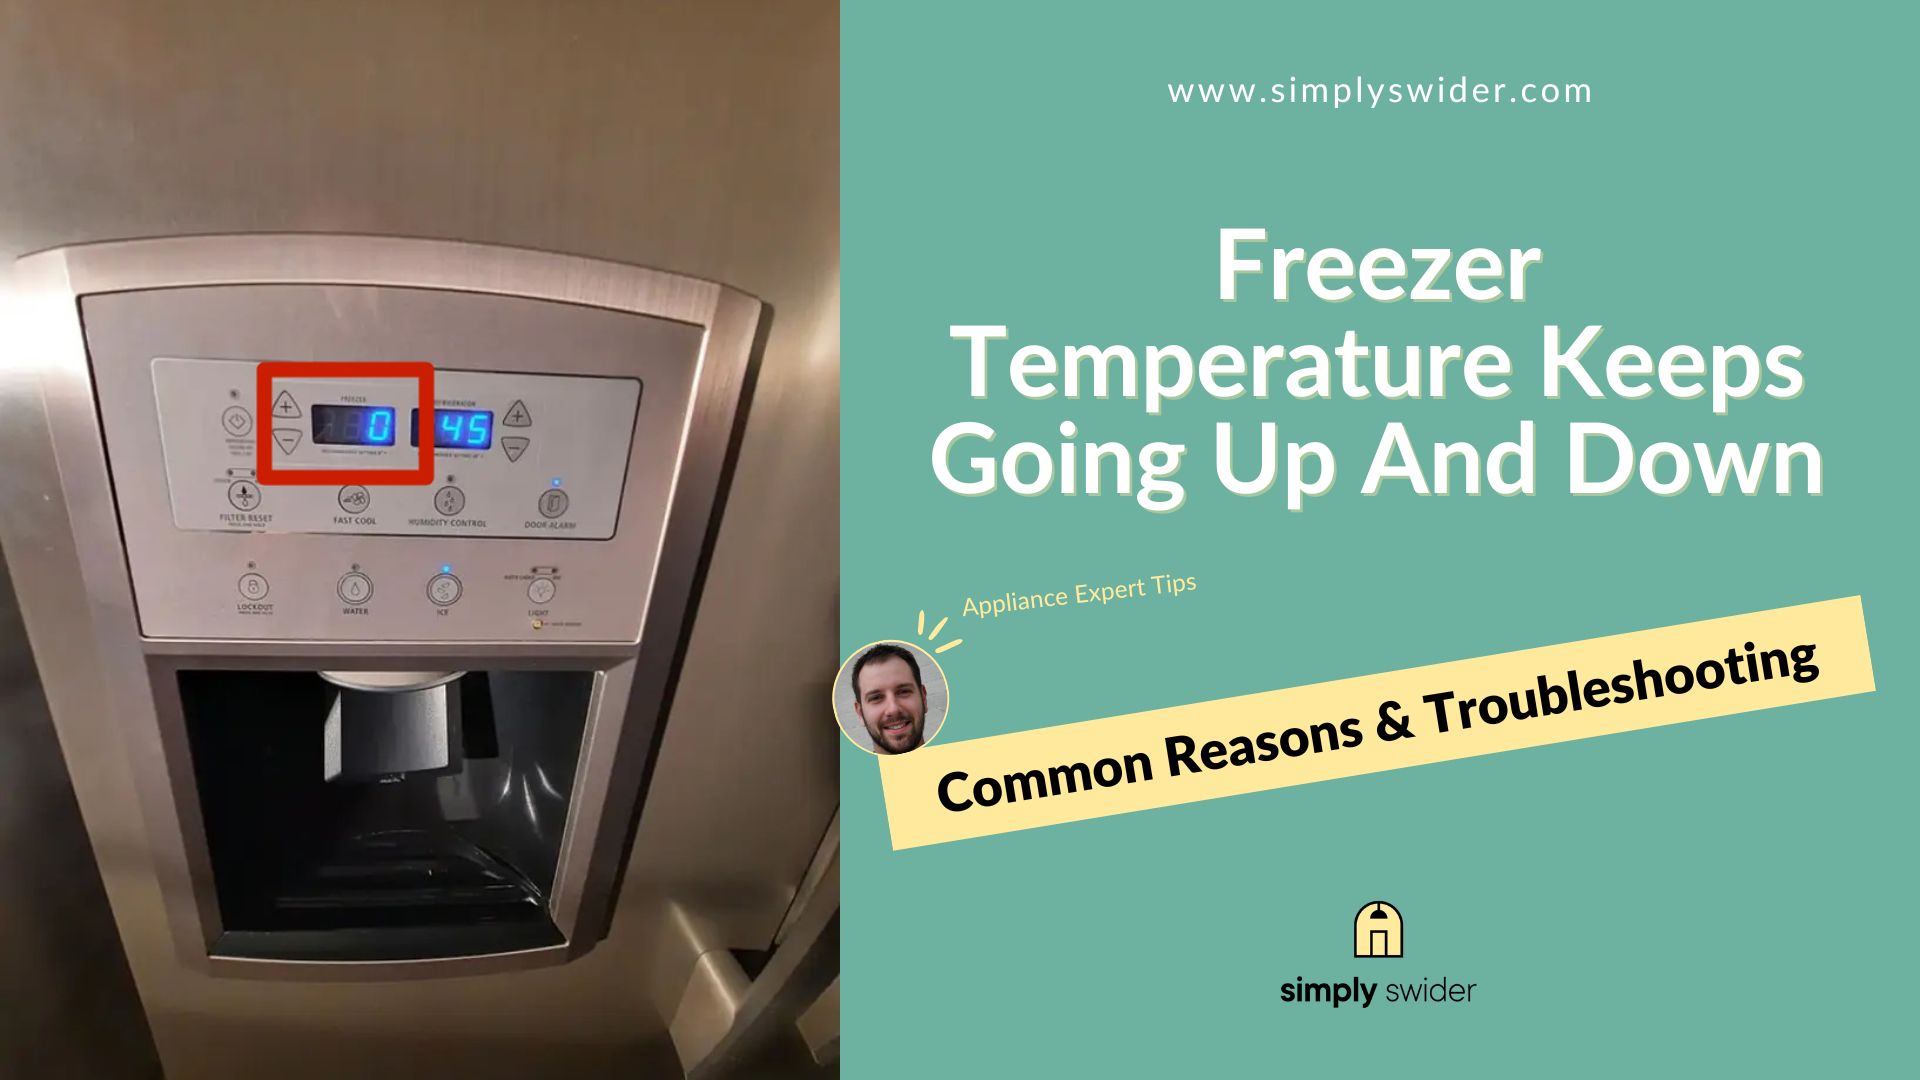 Freezer Temperature Keeps Going Up And Down